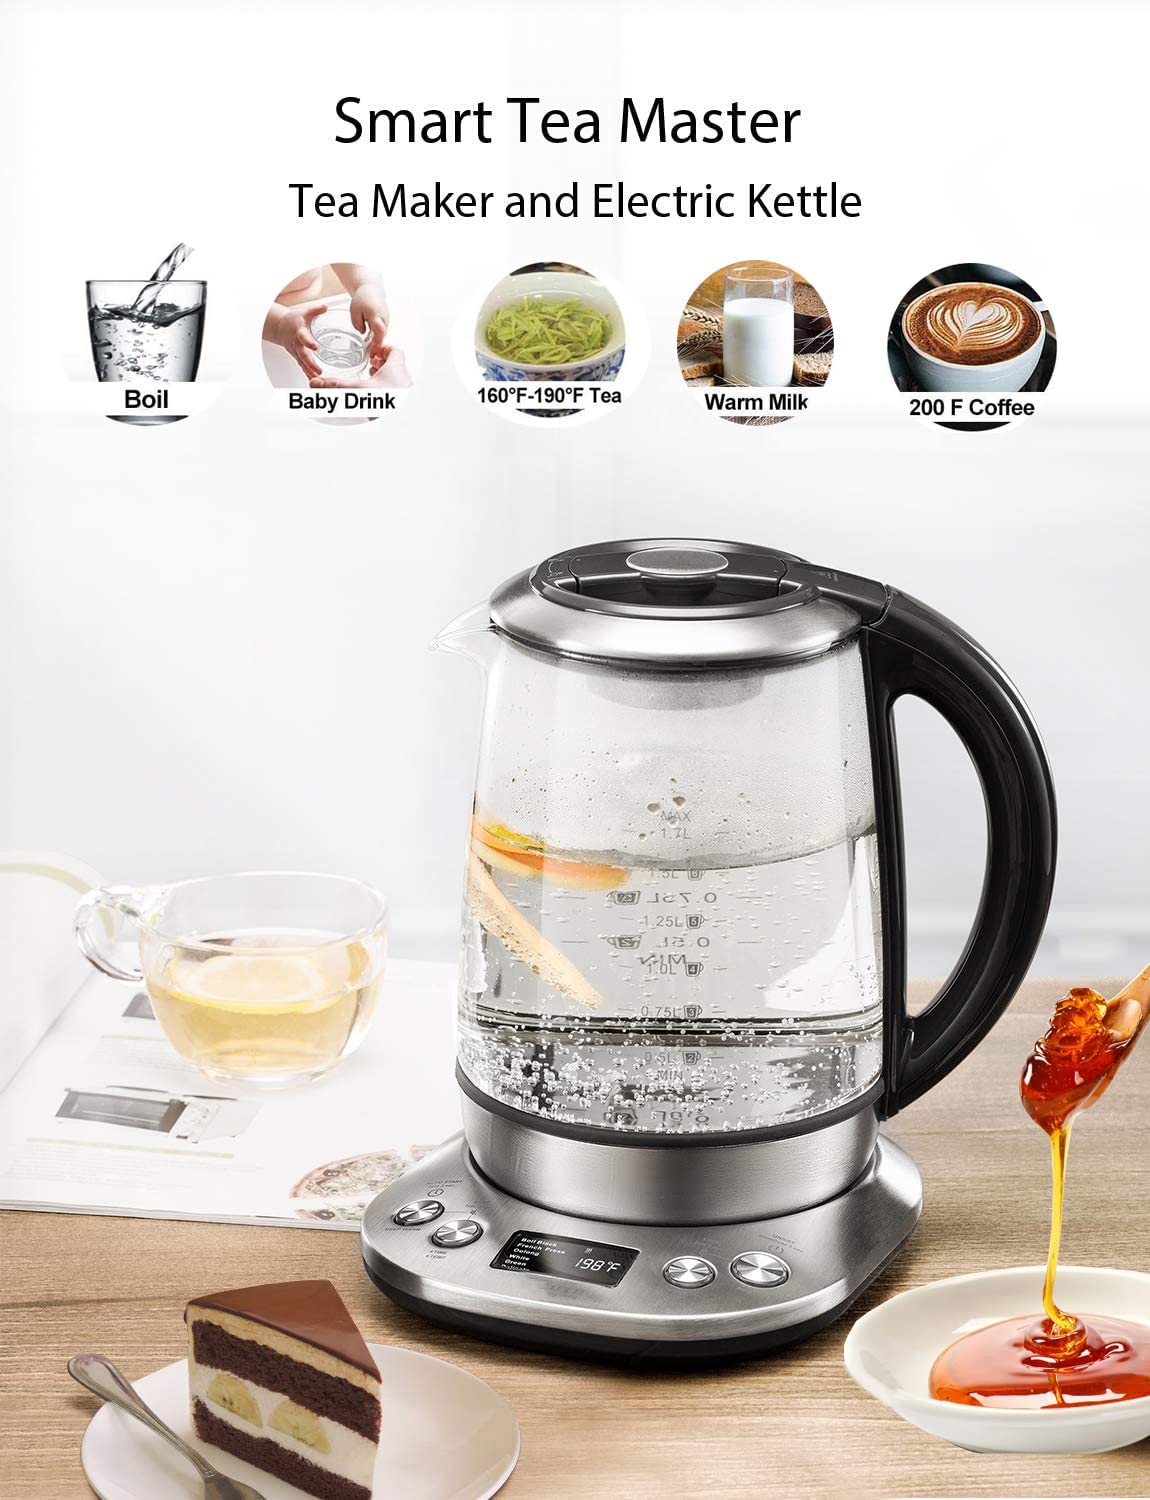 Decen Electric Tea Kettle, 1200W Variable Temperature Smart Tea Maker, Fast  Boil Electric Glass Kettle with 2Hr Keep Warm Function, Premium Stainless